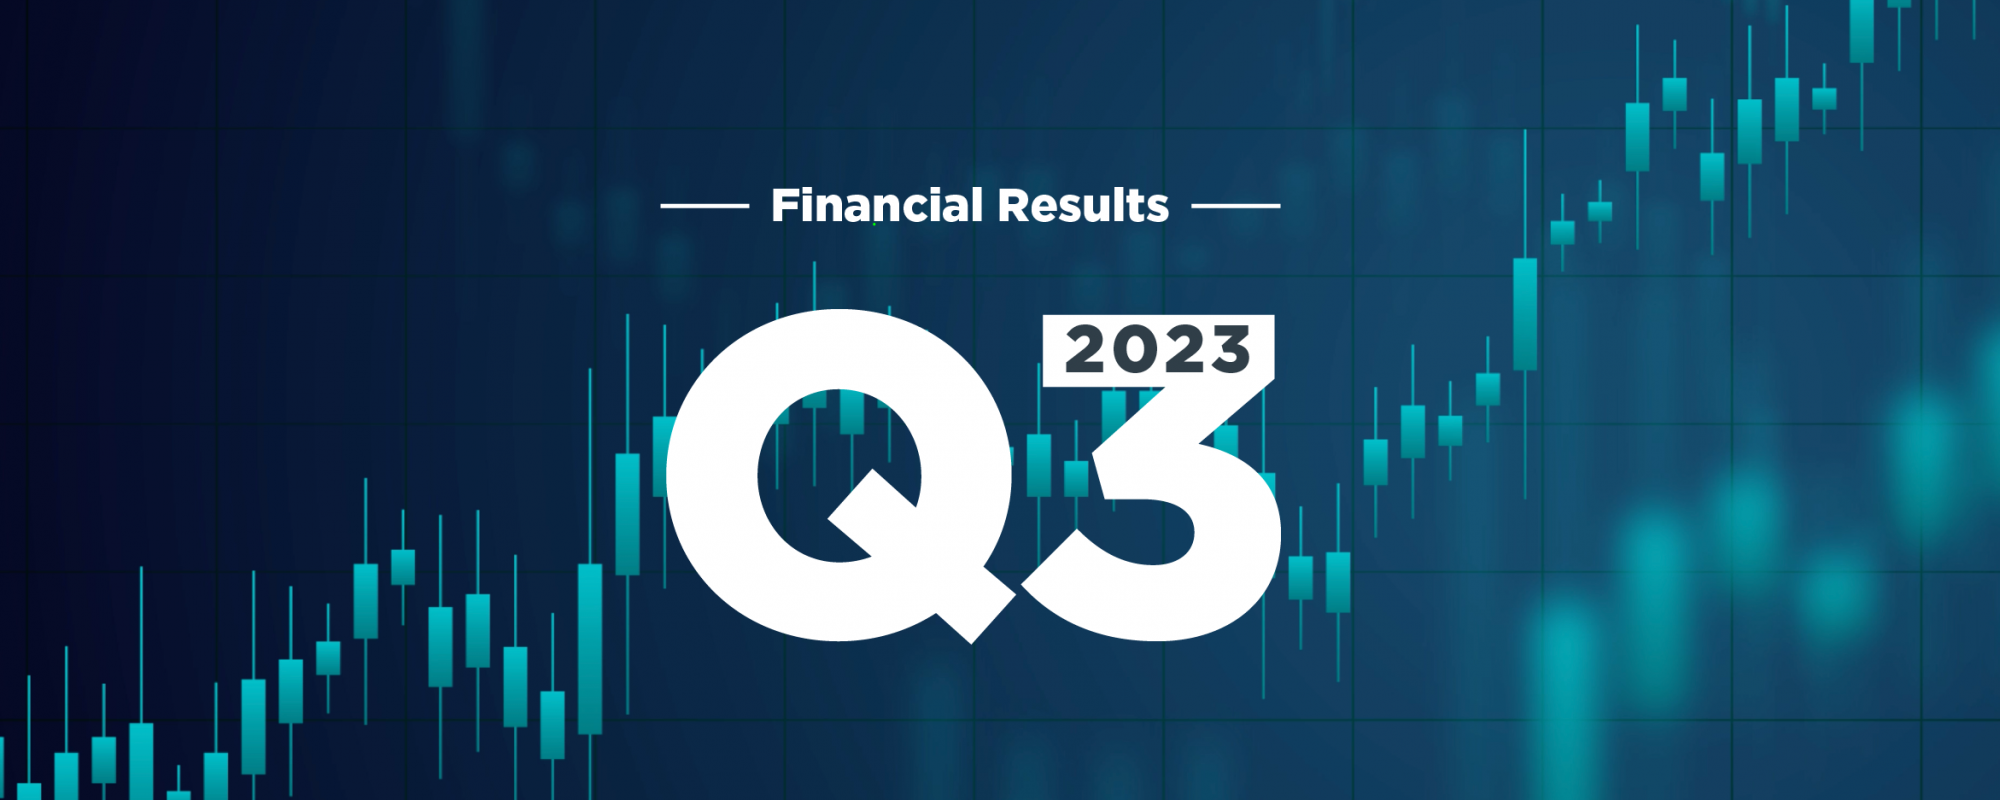 Multiply Group Announces 337% YoY Increase in Net Profit Excluding Fair Value Changes for Q3 2023